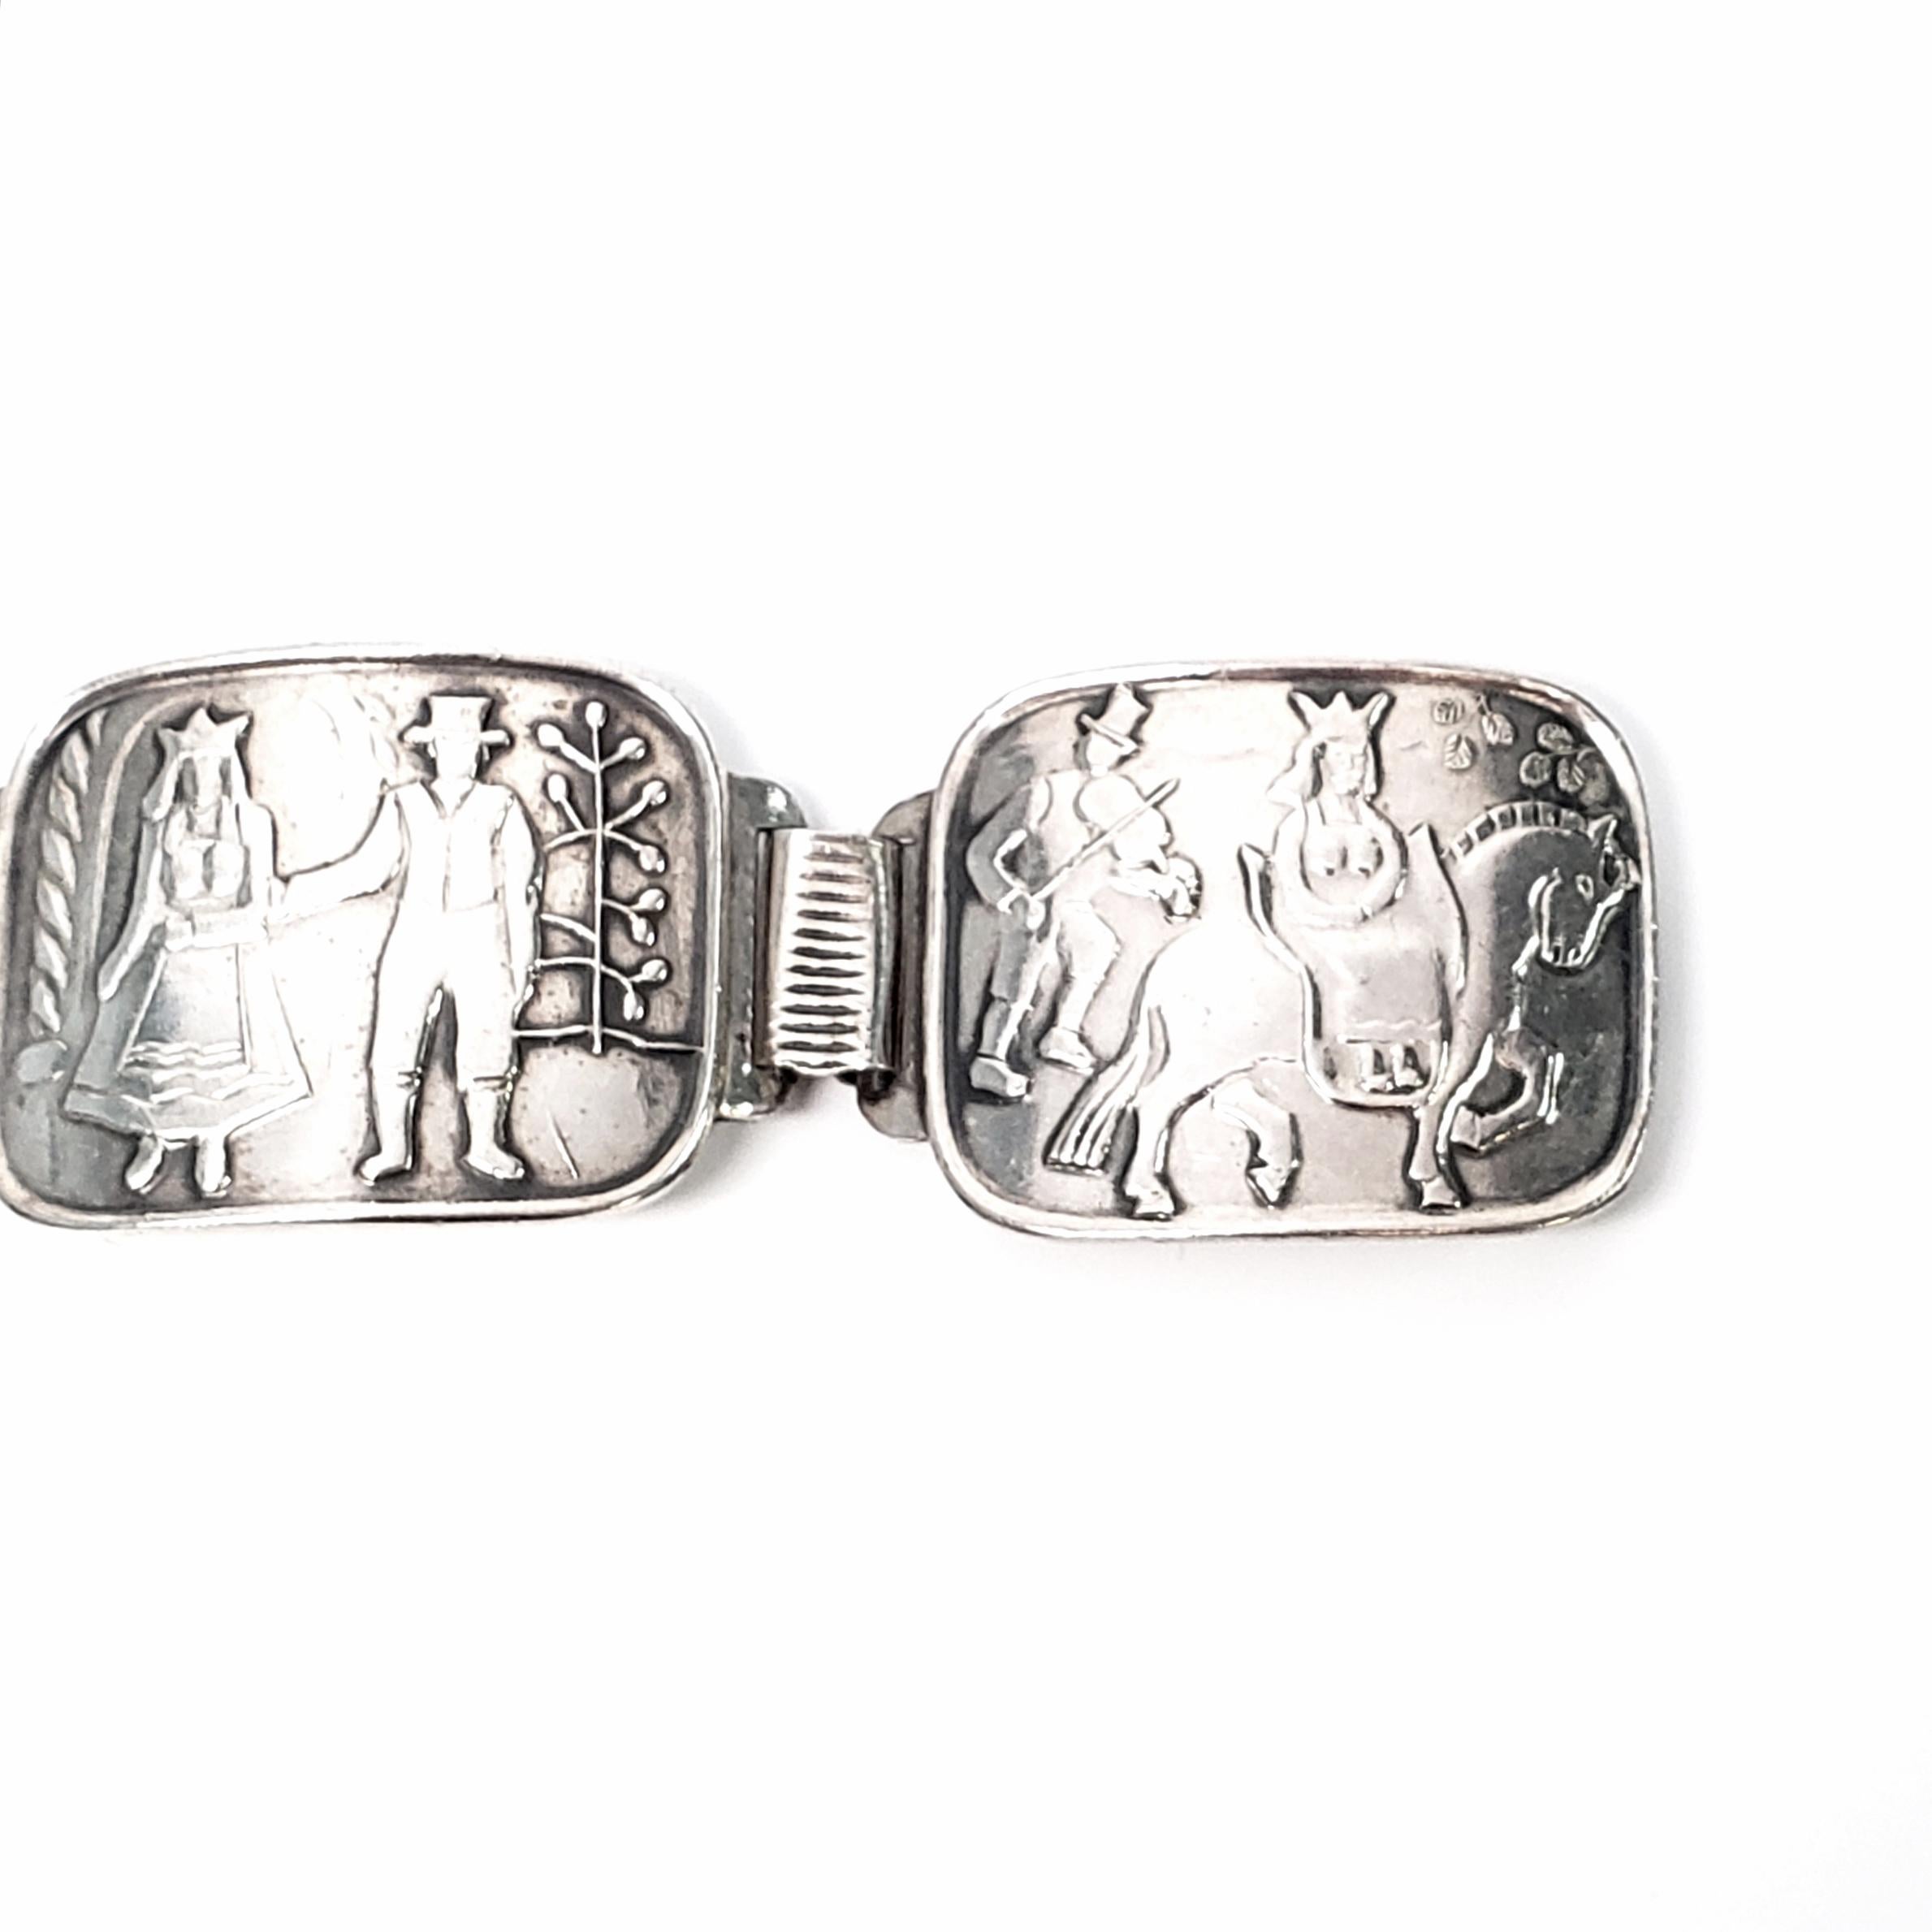 NM Thune Norway Sterling Silver Marriage Scenes Panel Bracelet In Good Condition For Sale In Washington Depot, CT